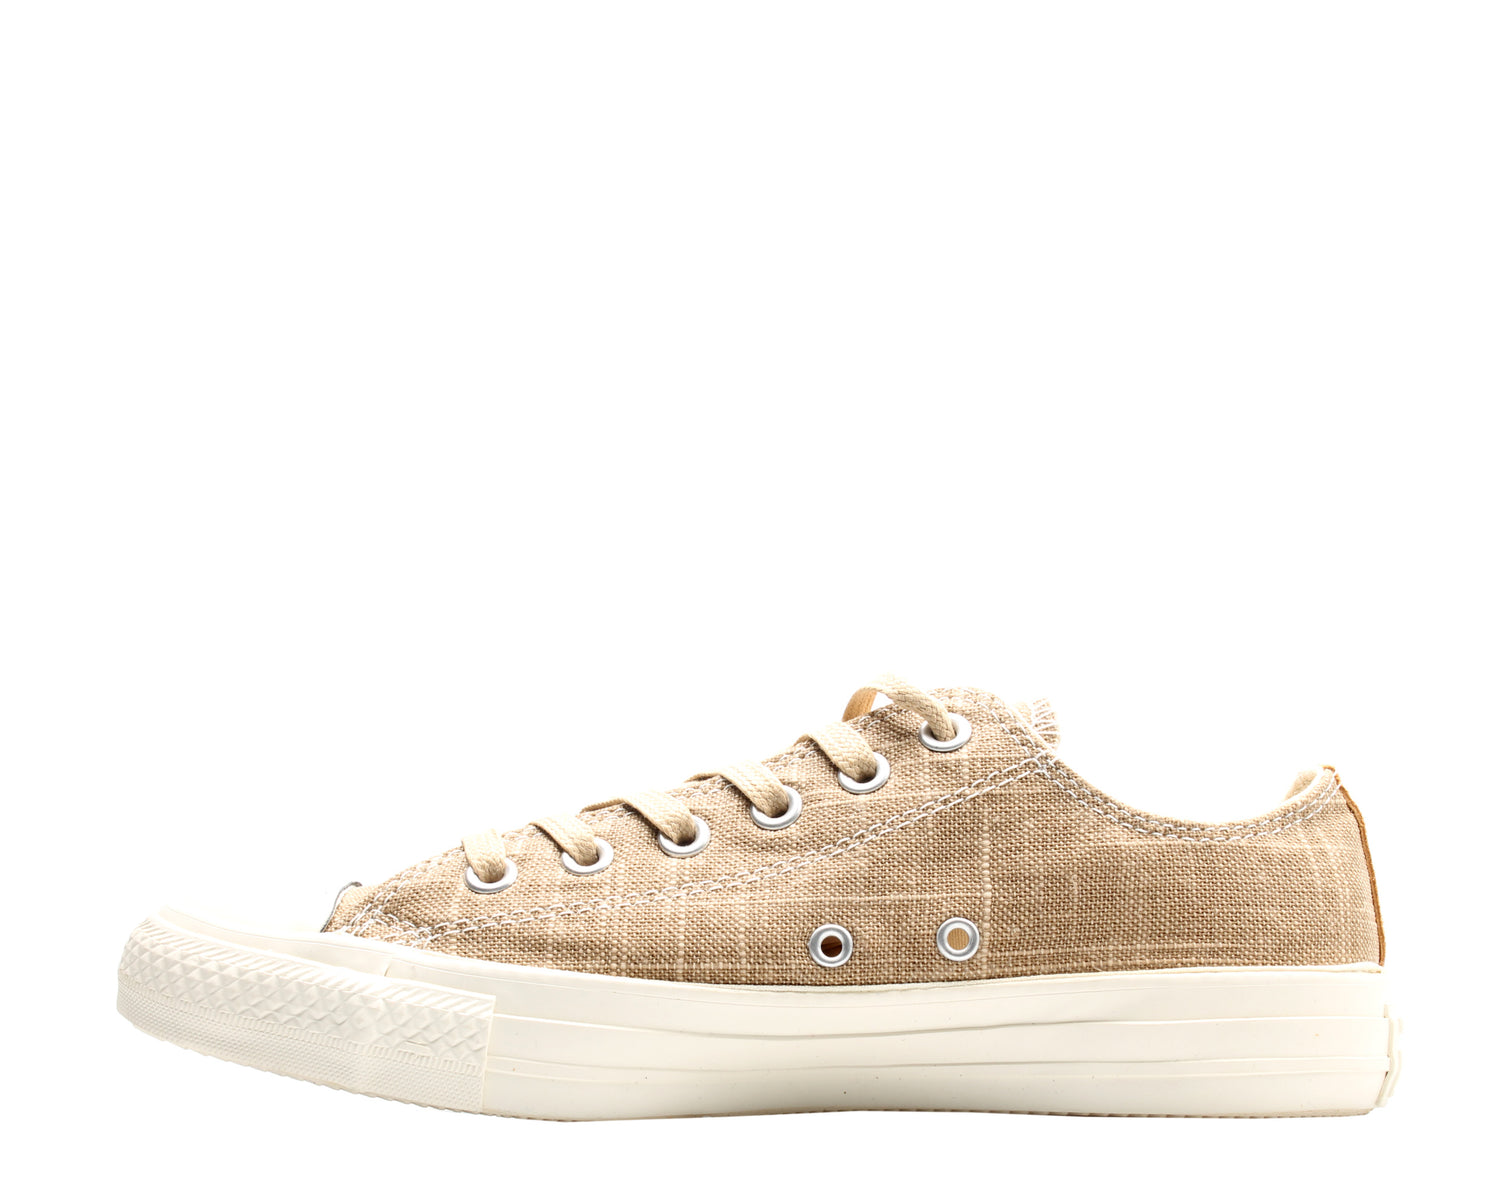 Converse Chuck Taylor All Star Ox Low Top Sneakers